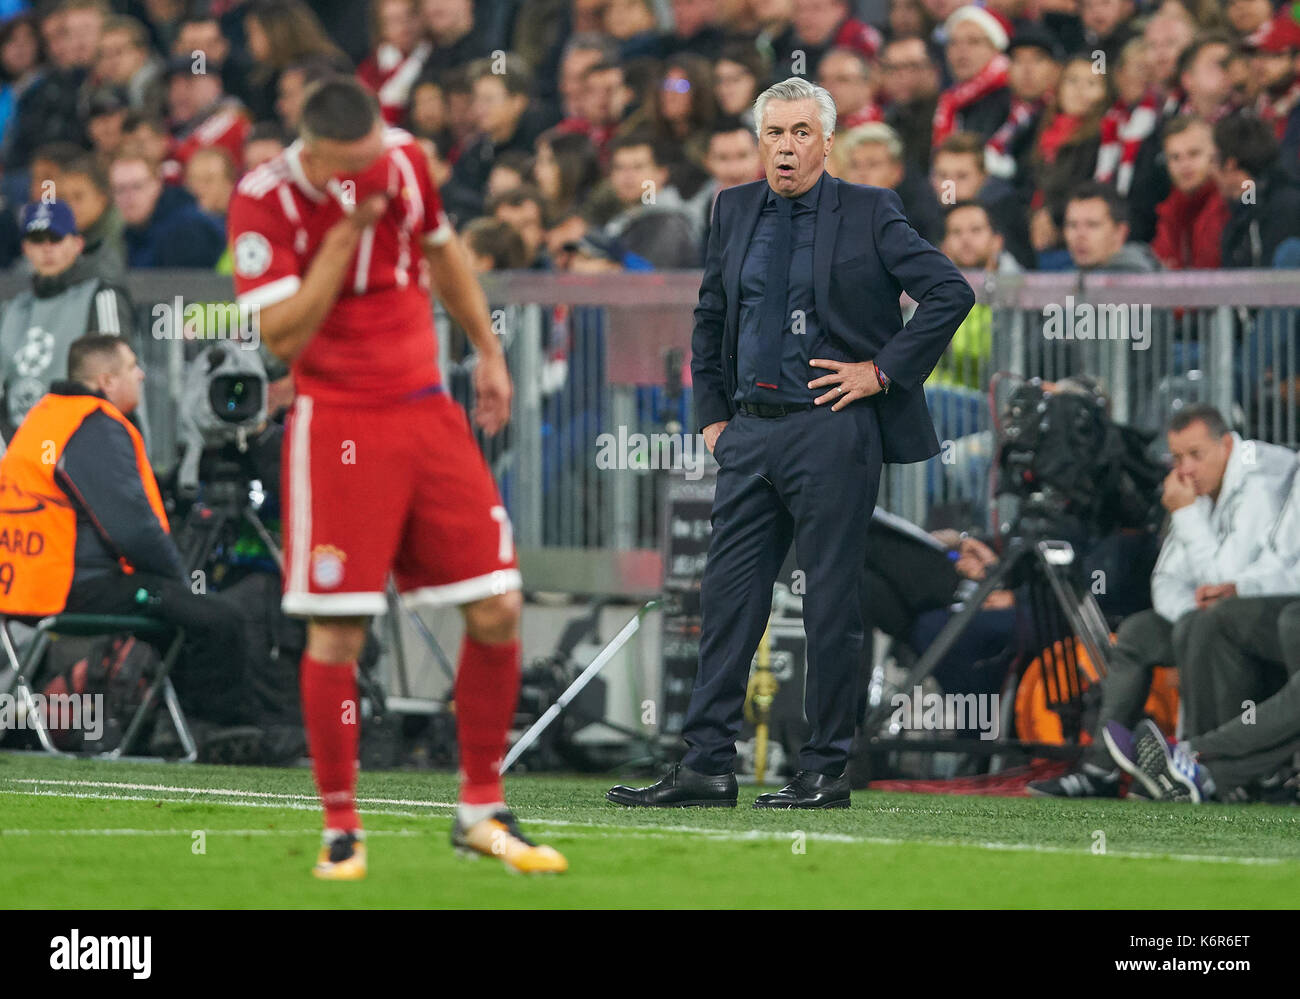 Munich, Germany. 12th Sep, 2017. Coach Carlo Ancelotti (FCB) next to sad and angry Franck RIBERY, FCB 7 UEFA Champions League group stage, FC BAVARIA MUNICH - RSC ANDERLECHT 3-0 in Munich, Sept 12, 2017 Credit: Peter Schatz/Alamy Live News Stock Photo